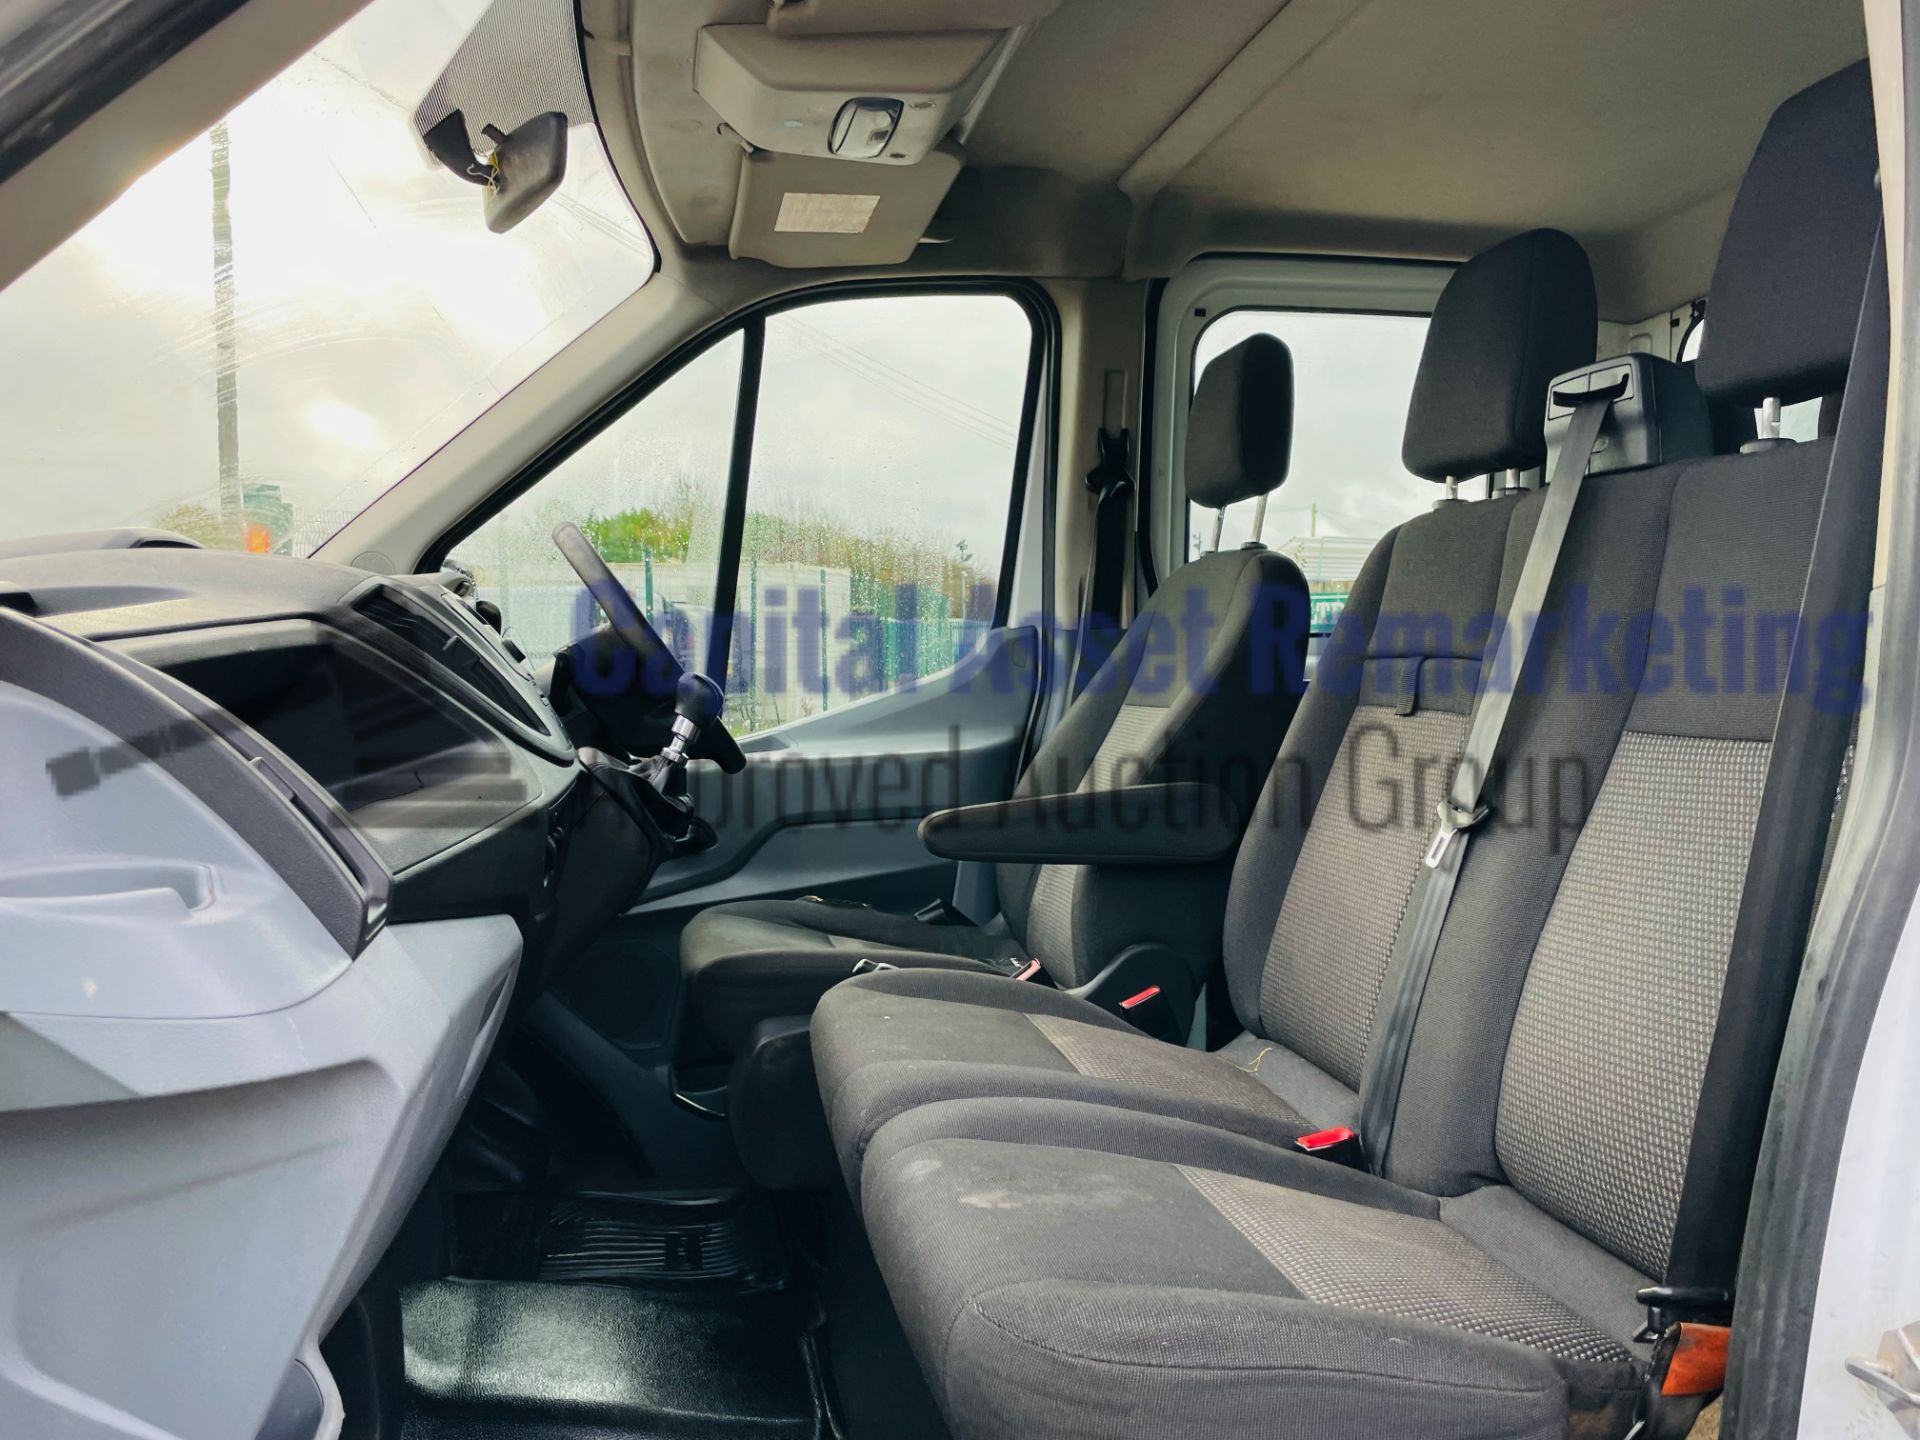 FORD TRANSIT *7 SEATER - DOUBLE CAB TIPPER* (2015) '2.2 TDCI - 125 BHP - 6 SPEED' (3500 KG) - Image 26 of 48